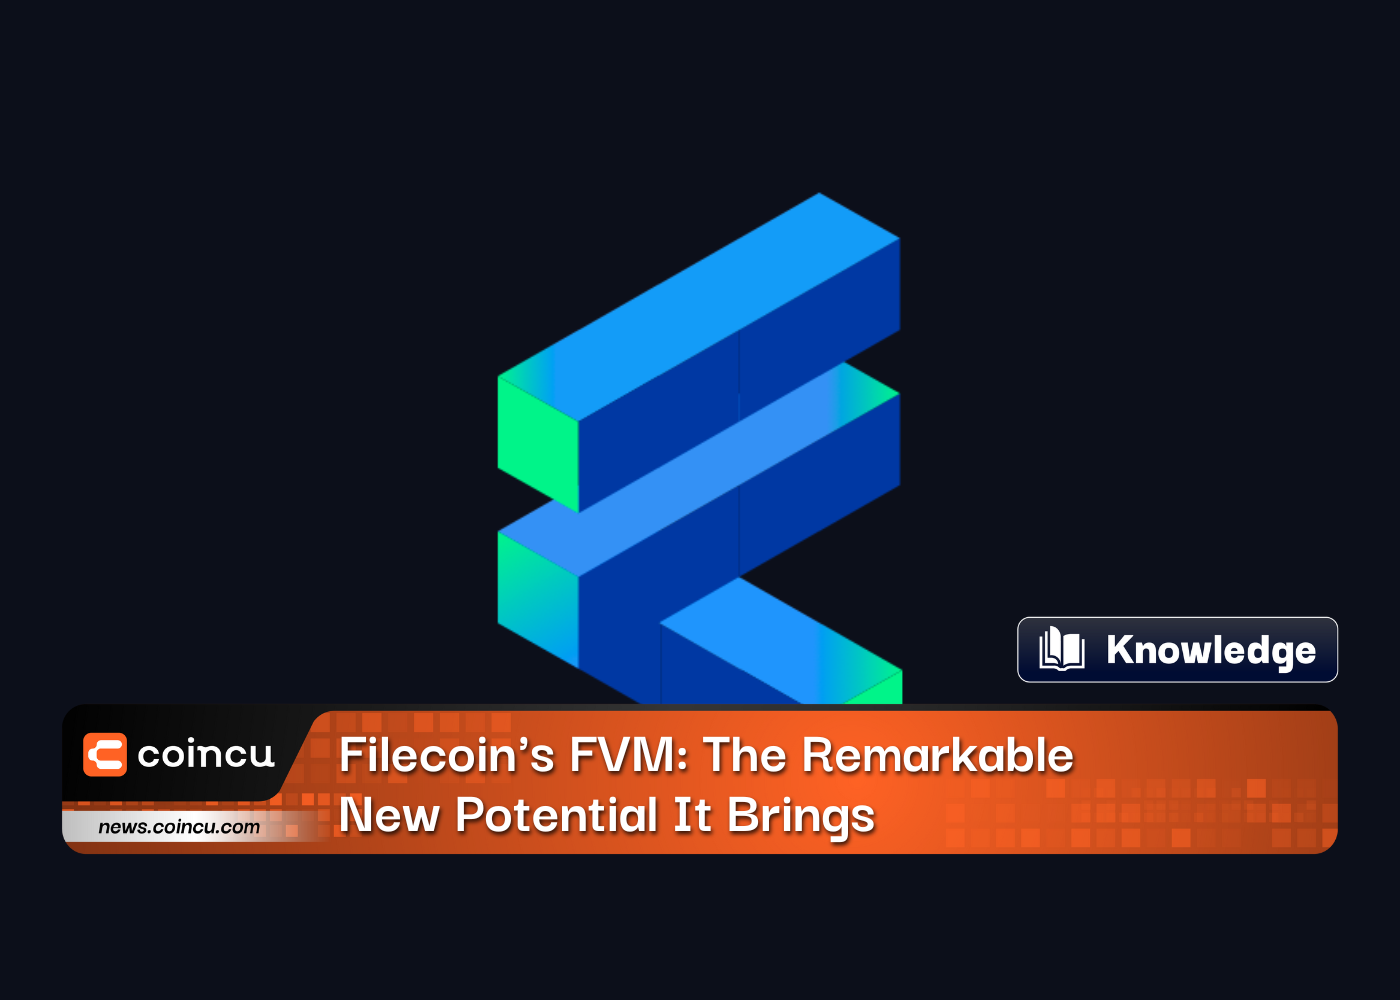 Filecoin's FVM: The Remarkable New Potential It Brings